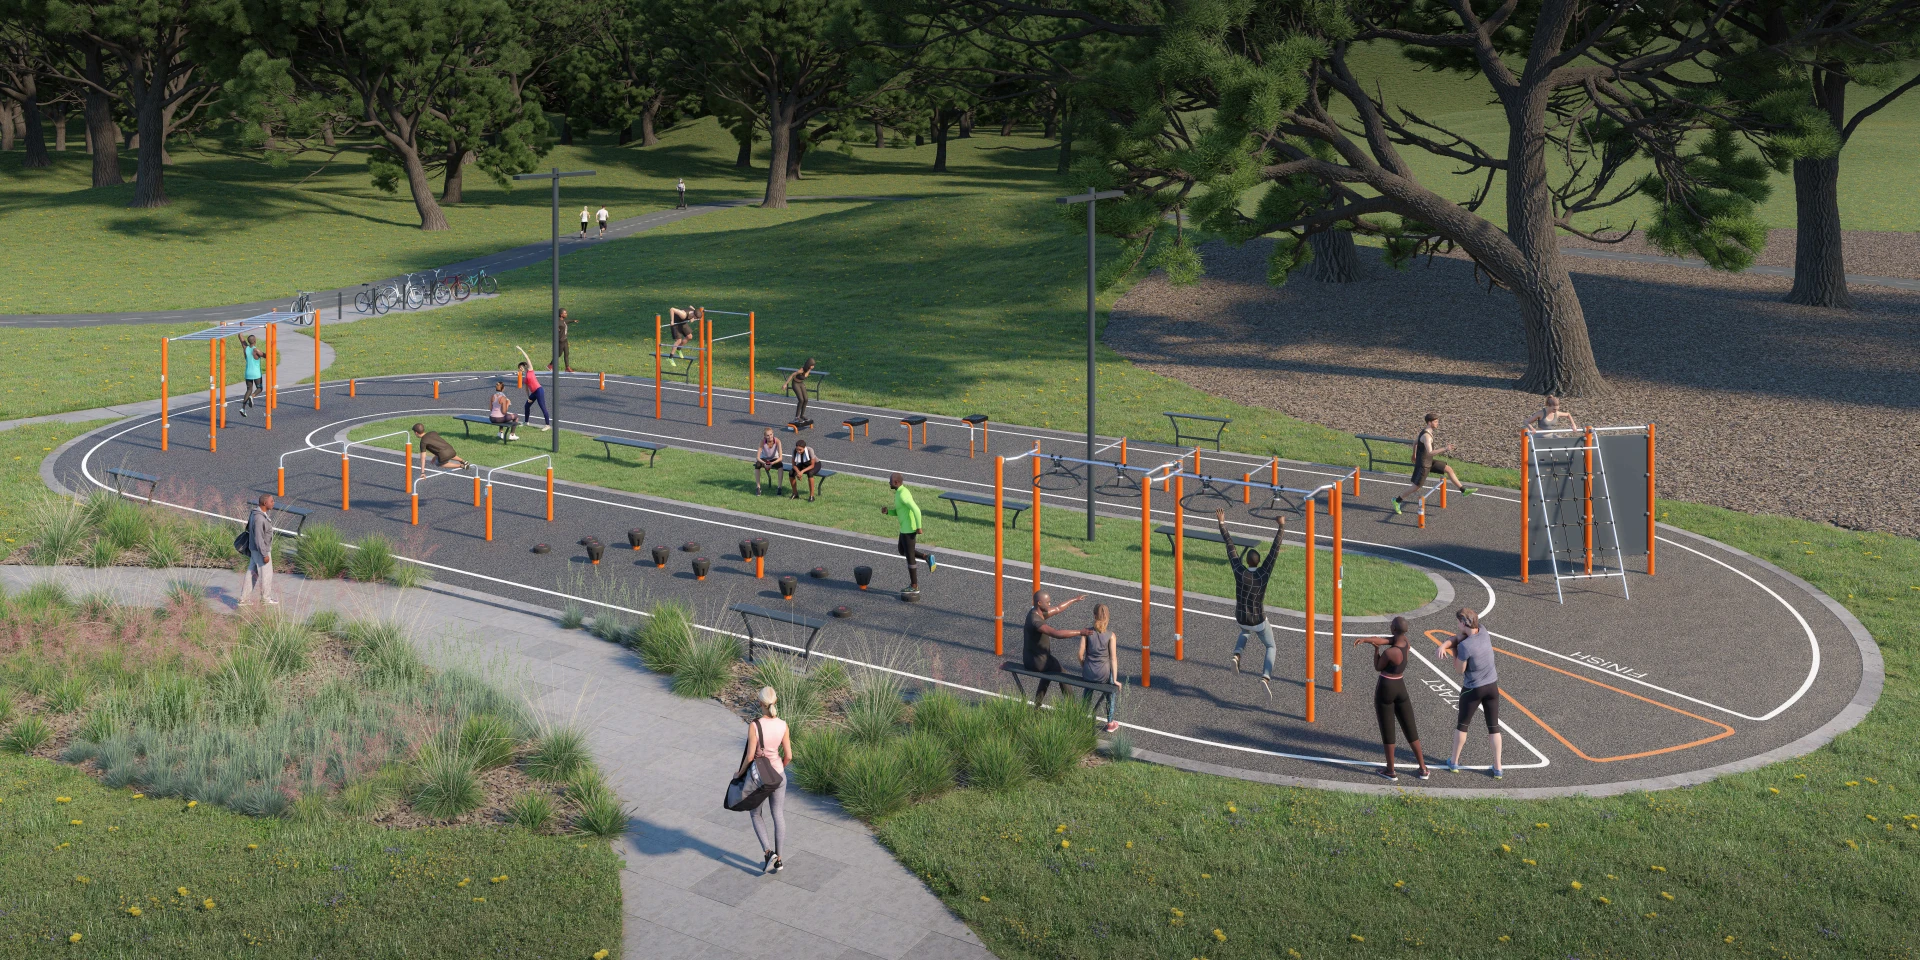 Concept design for and outdoor fitness area and obstacle course